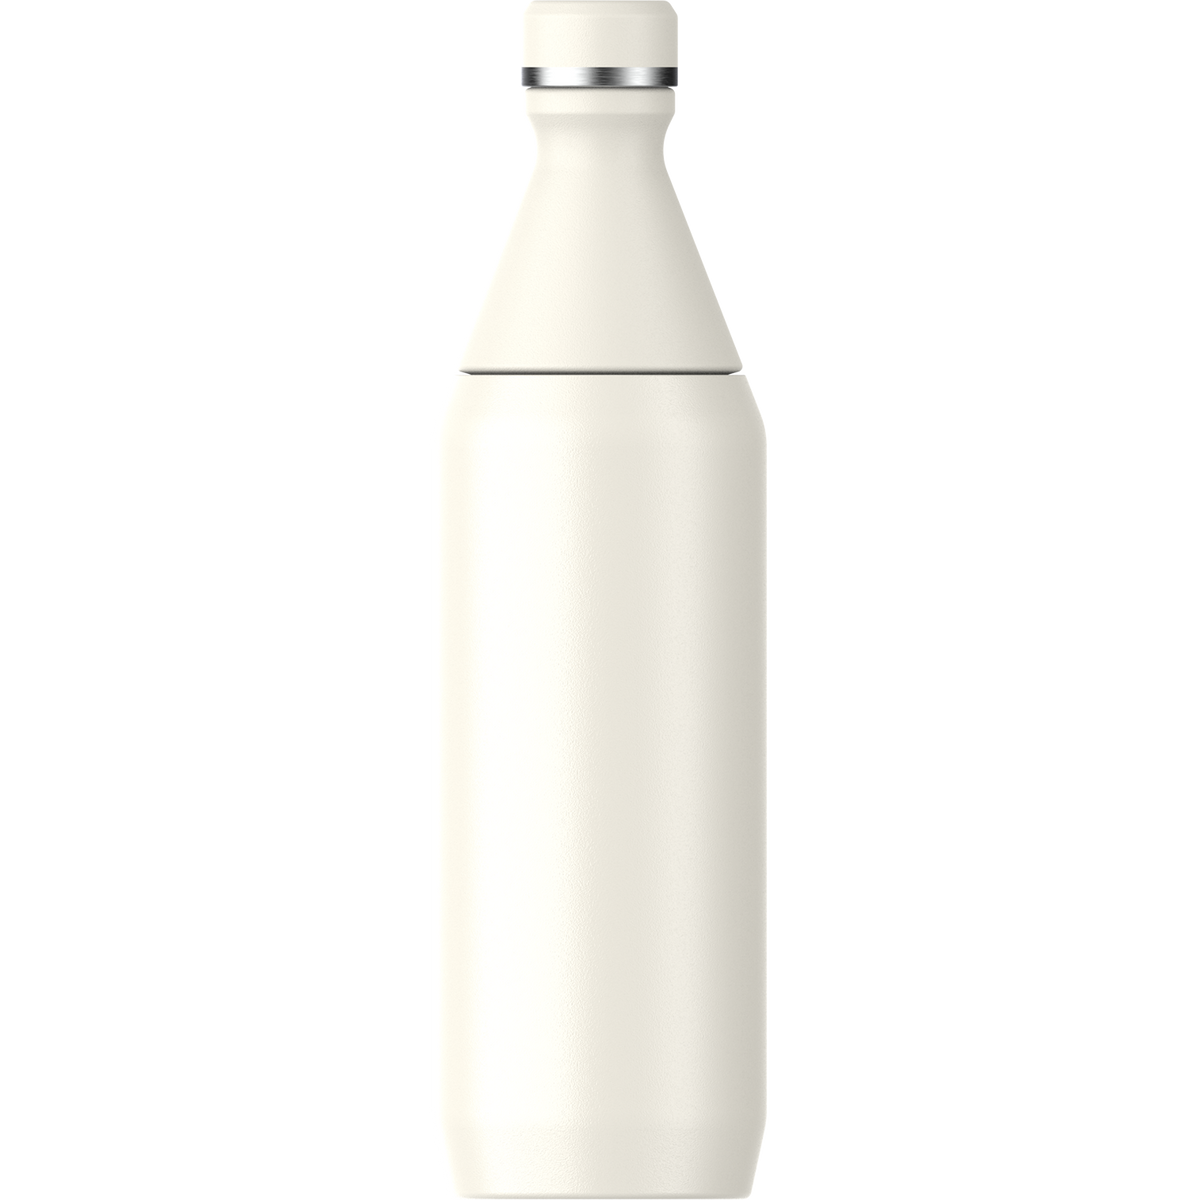 Stanley The All Day Slim Bottle 0.6L